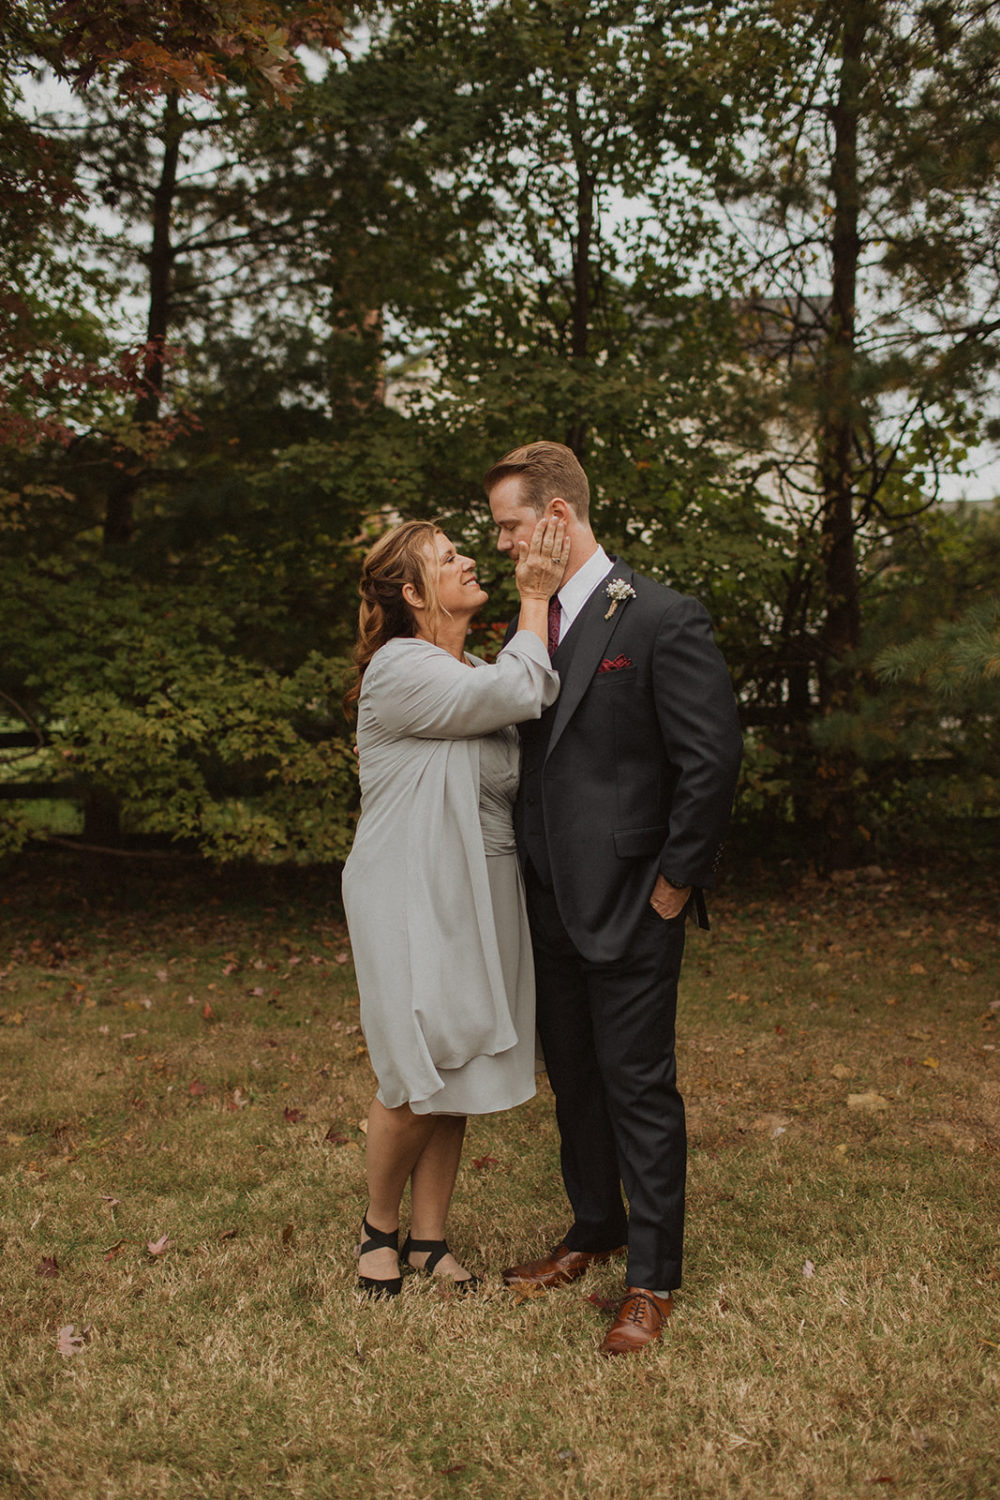 Mom embraces groom during family portraits